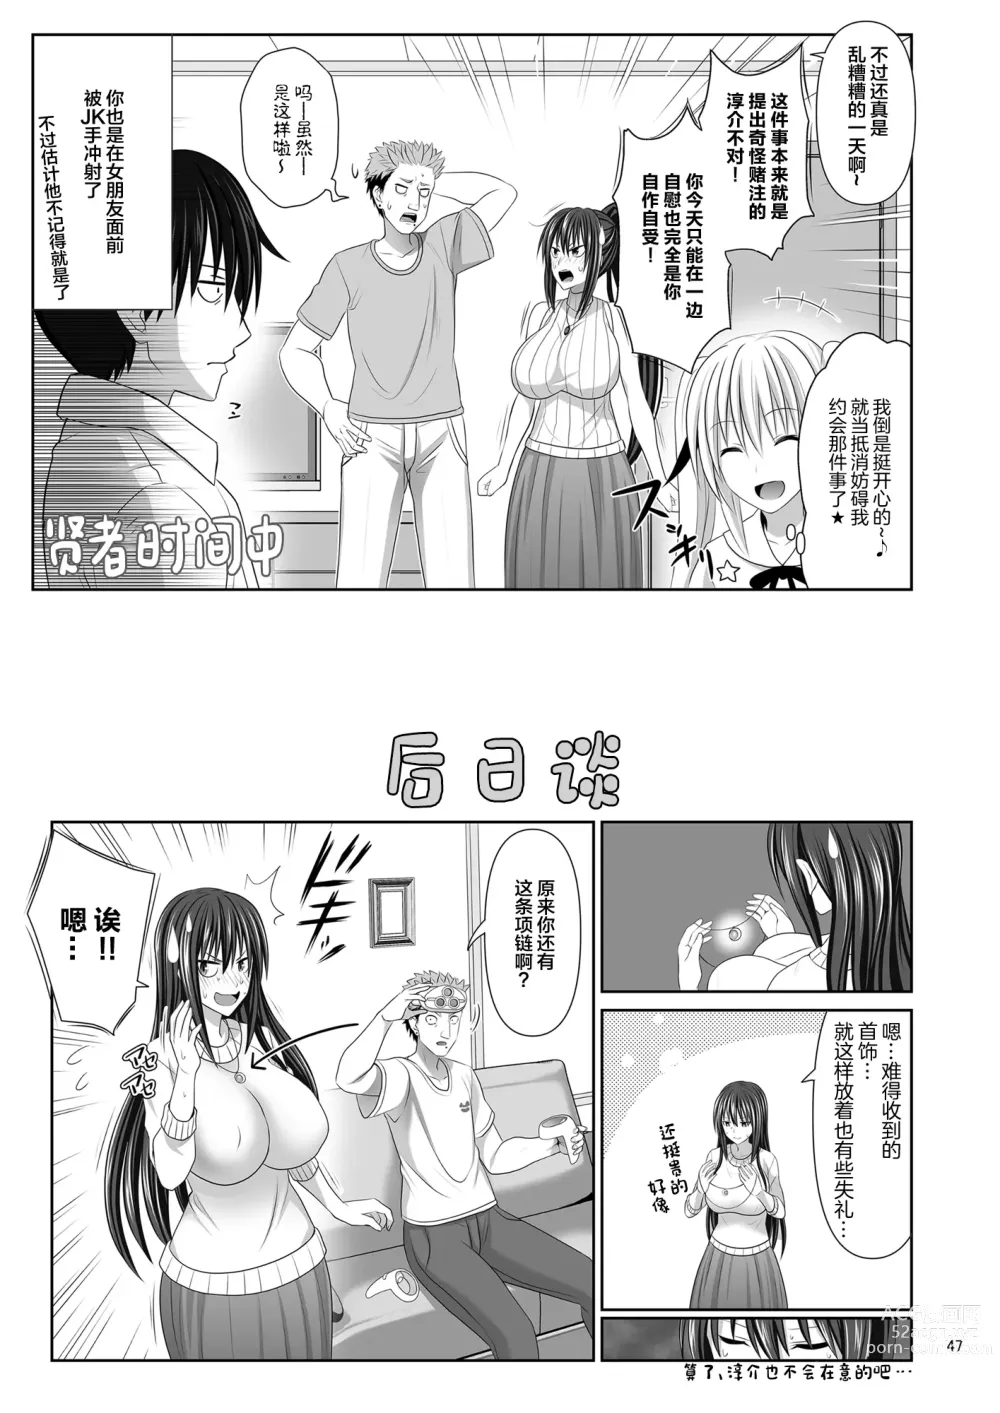 Page 47 of doujinshi SEX FRIEND 6